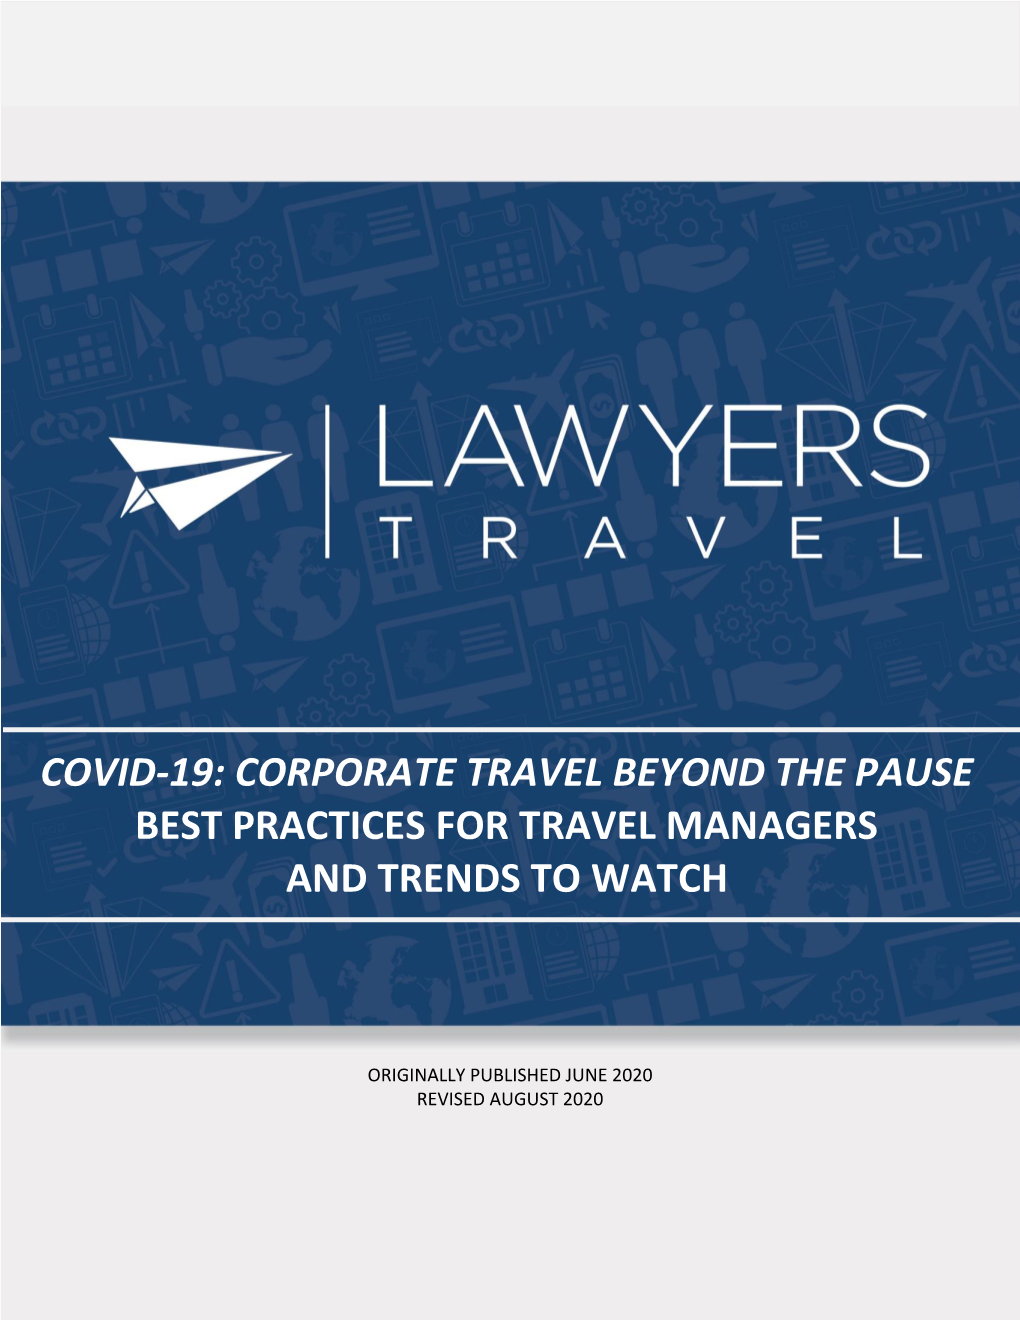 Covid-19: Corporate Travel Beyond the Pause Best Practices for Travel Managers and Trends to Watch